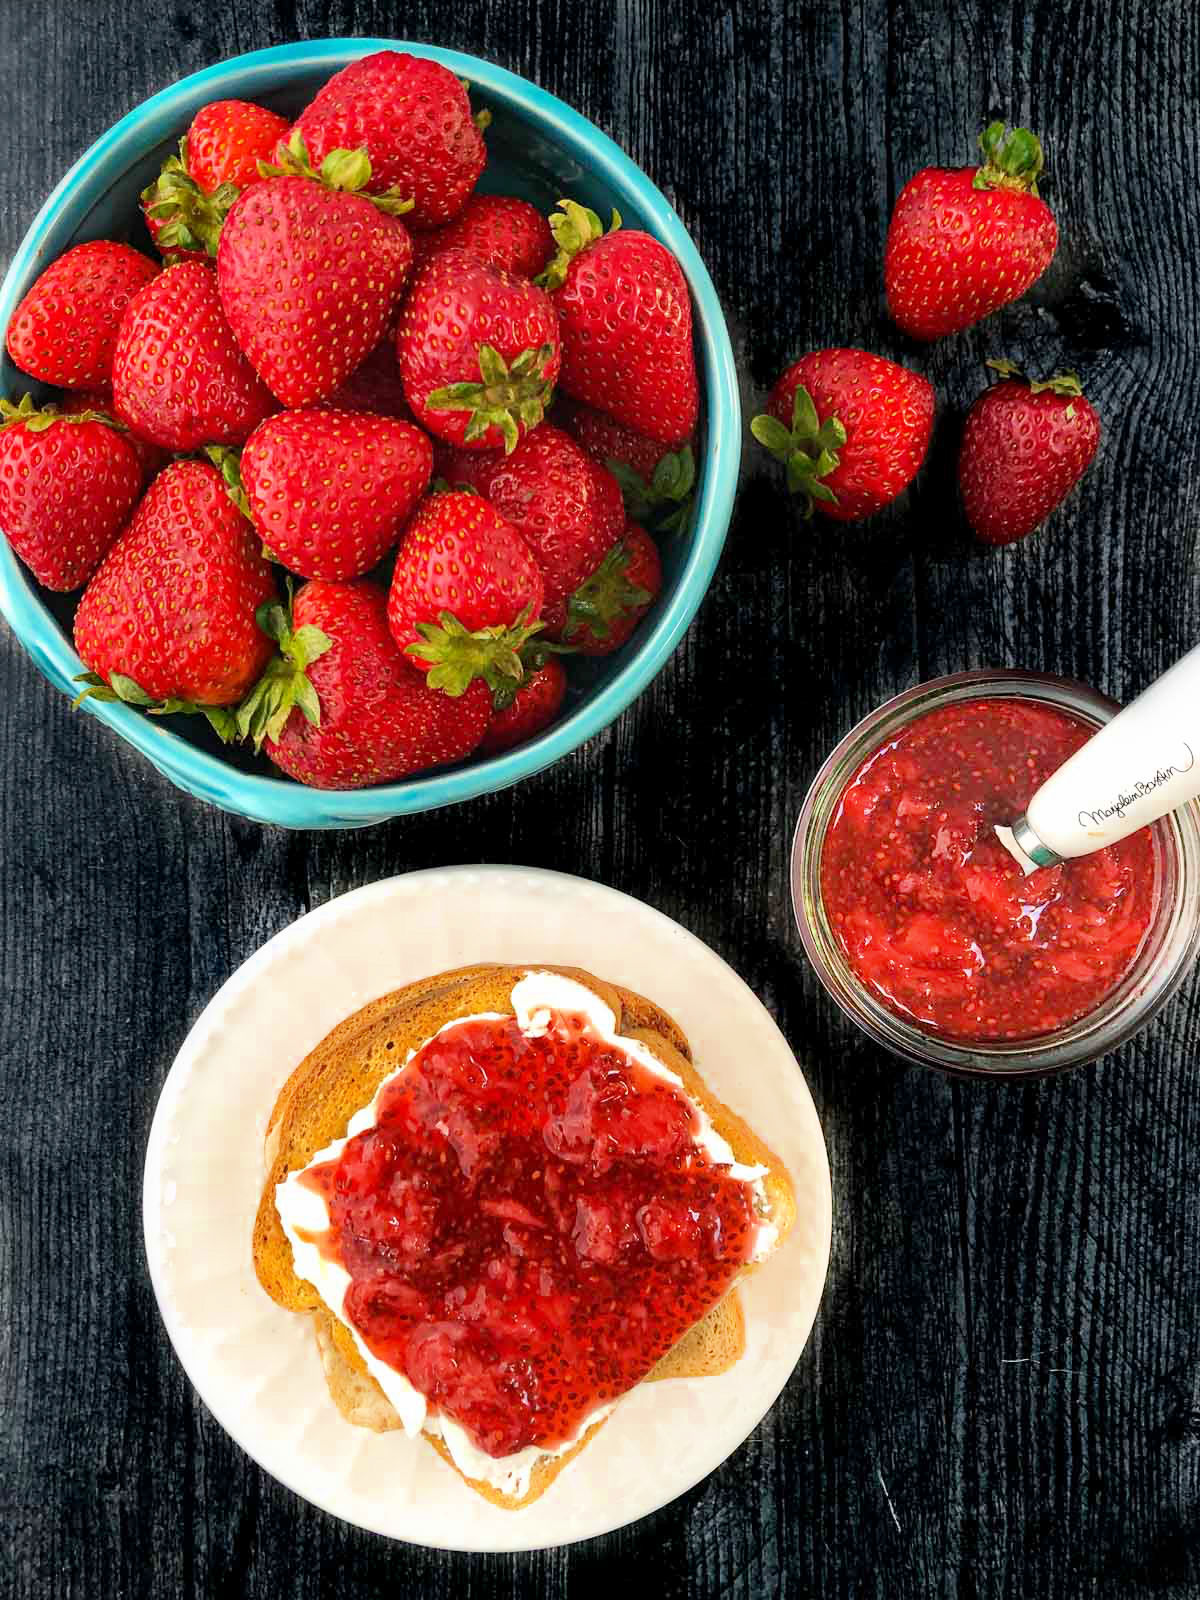 aerial view of fresh strawberries and toast with strawberry jam